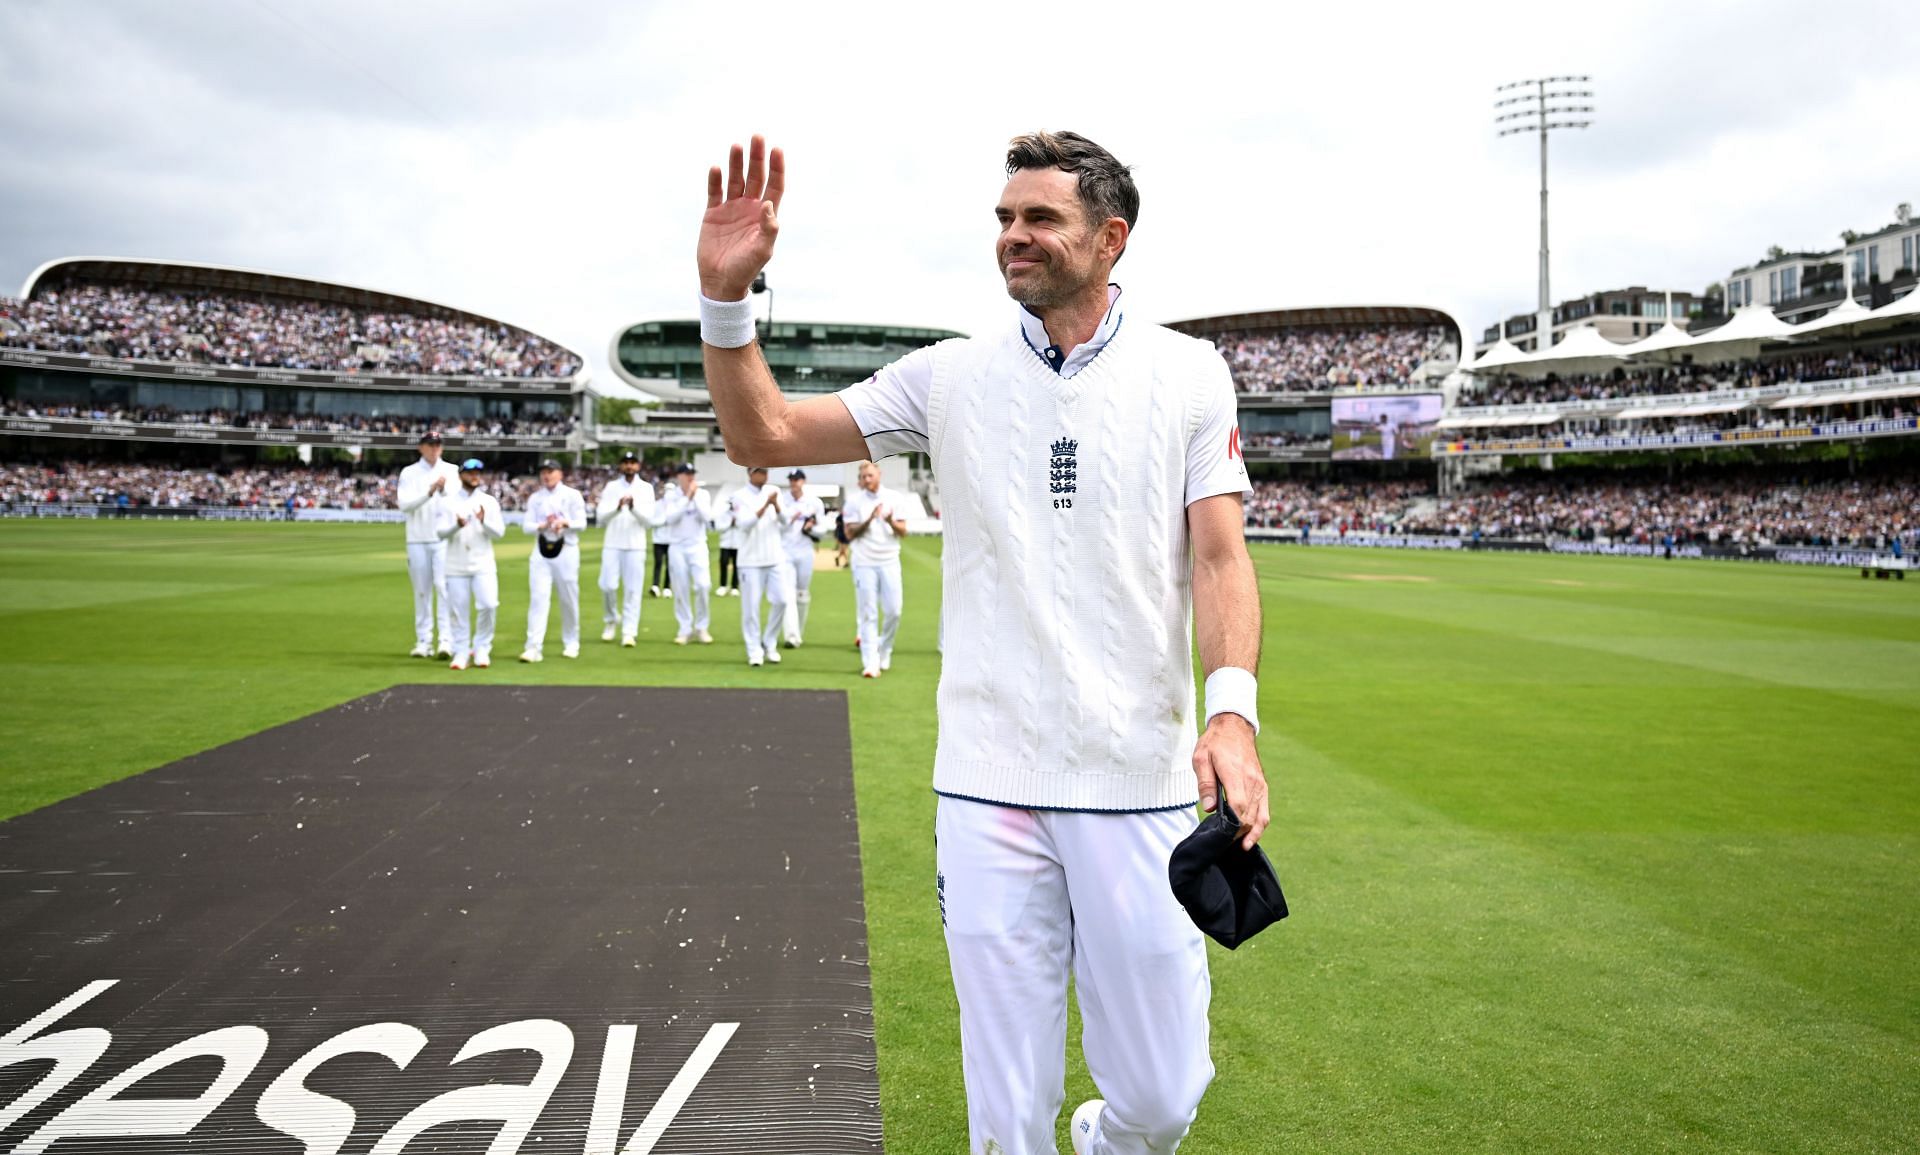 [Watch] James Anderson's final peach to Joshua Da Silva to end his magical career on 704 wickets